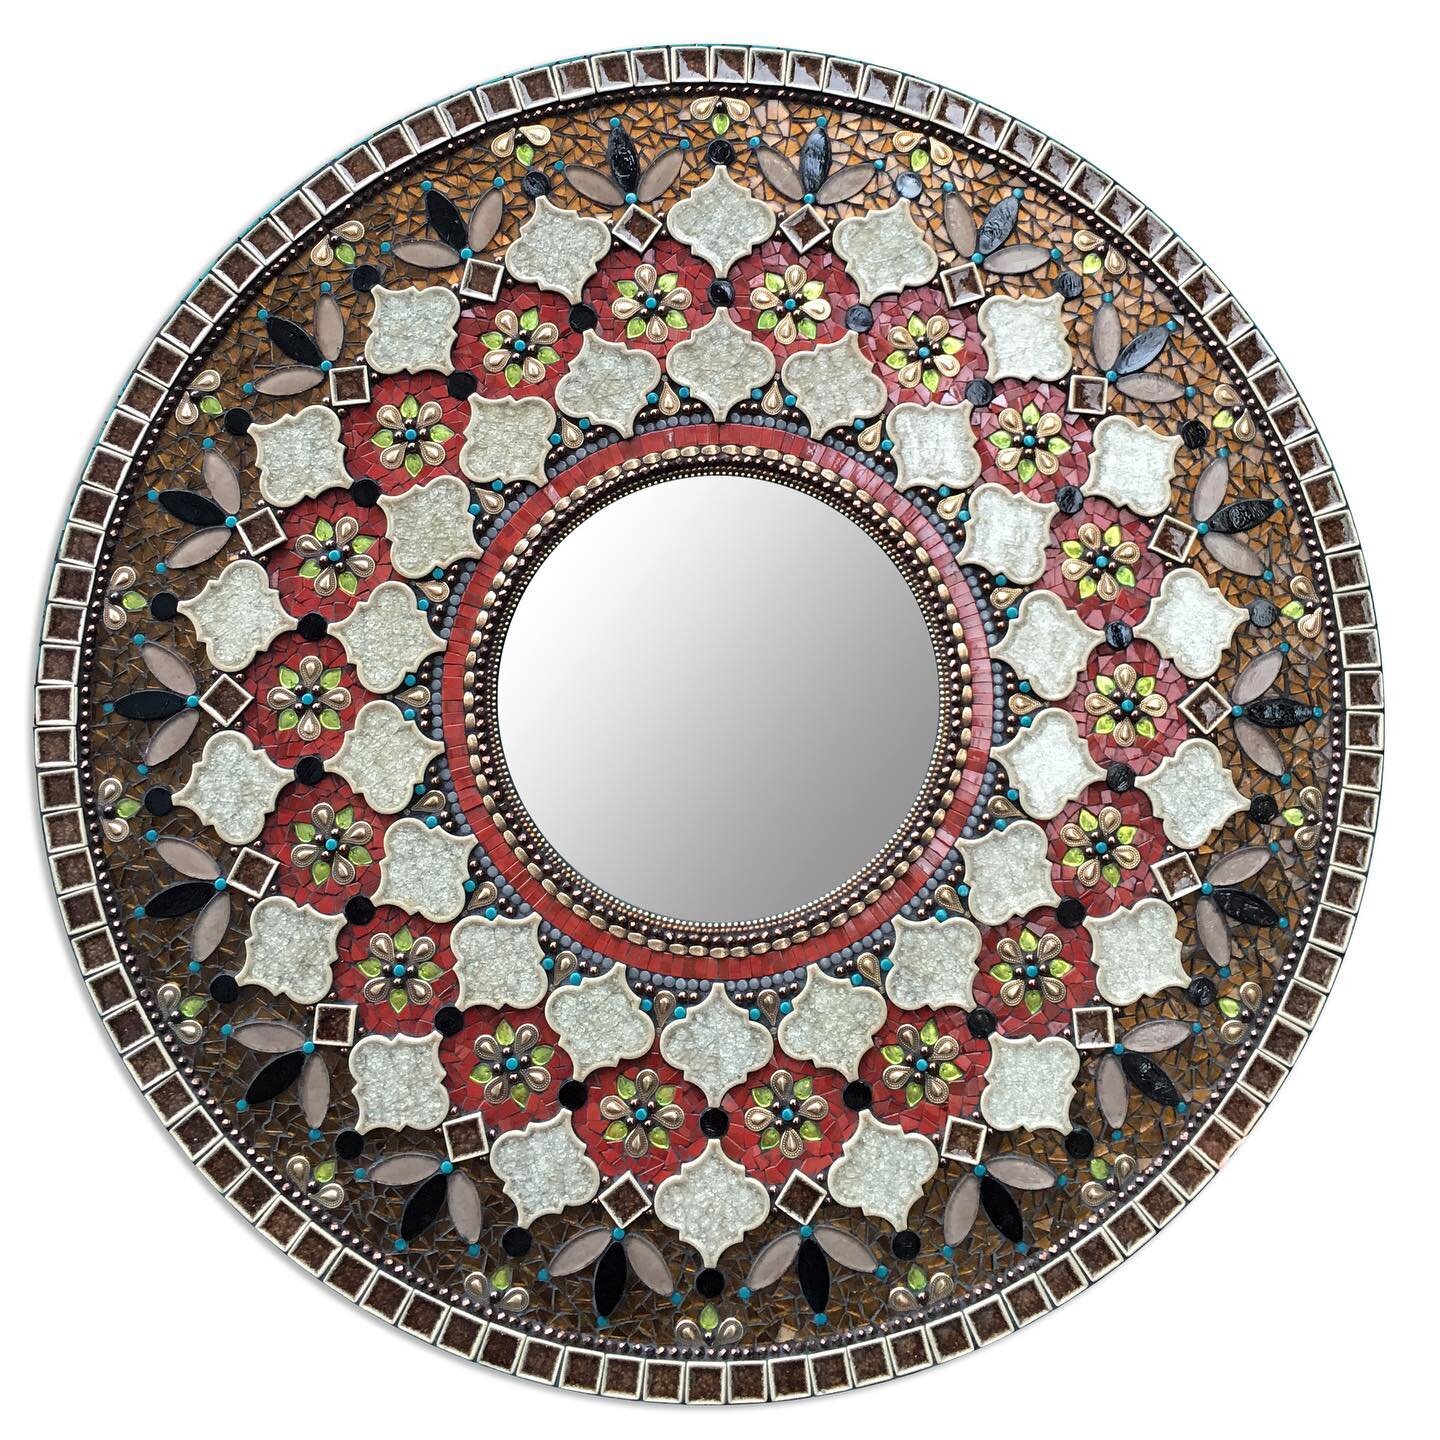 This a custom mirror I created a few years ago. The couple that commissioned this piece wanted to pull colors and inspiration from art they collected in their travel together.

36in diameter w/ 12in mirror glass. 
.
.
.

#mosaicart&nbsp;#mosaic #zeta